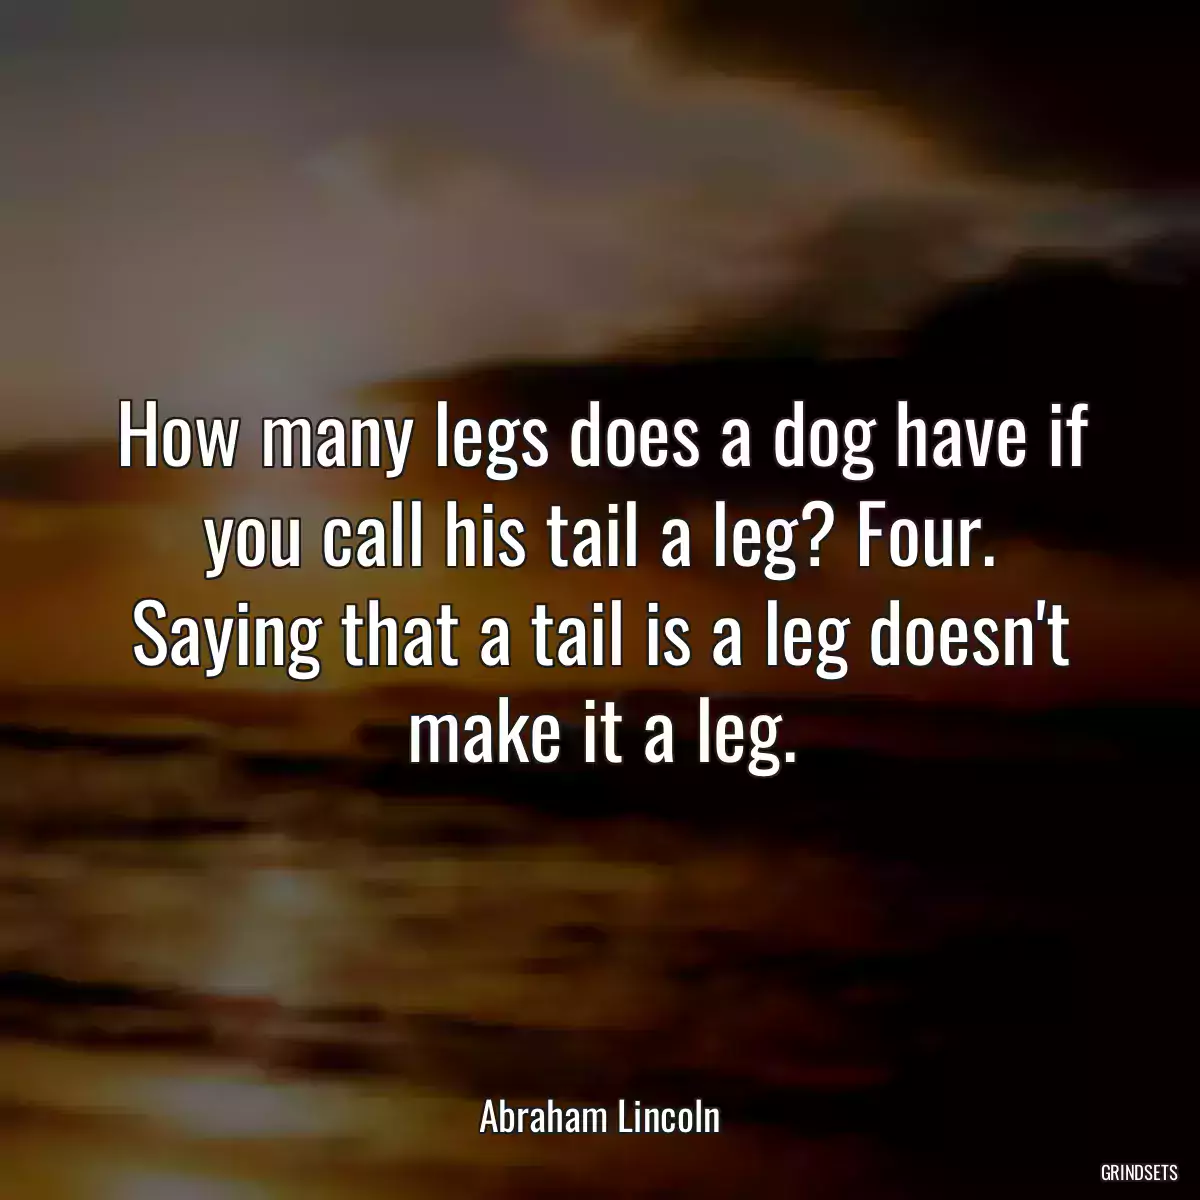 How many legs does a dog have if you call his tail a leg? Four. Saying that a tail is a leg doesn\'t make it a leg.